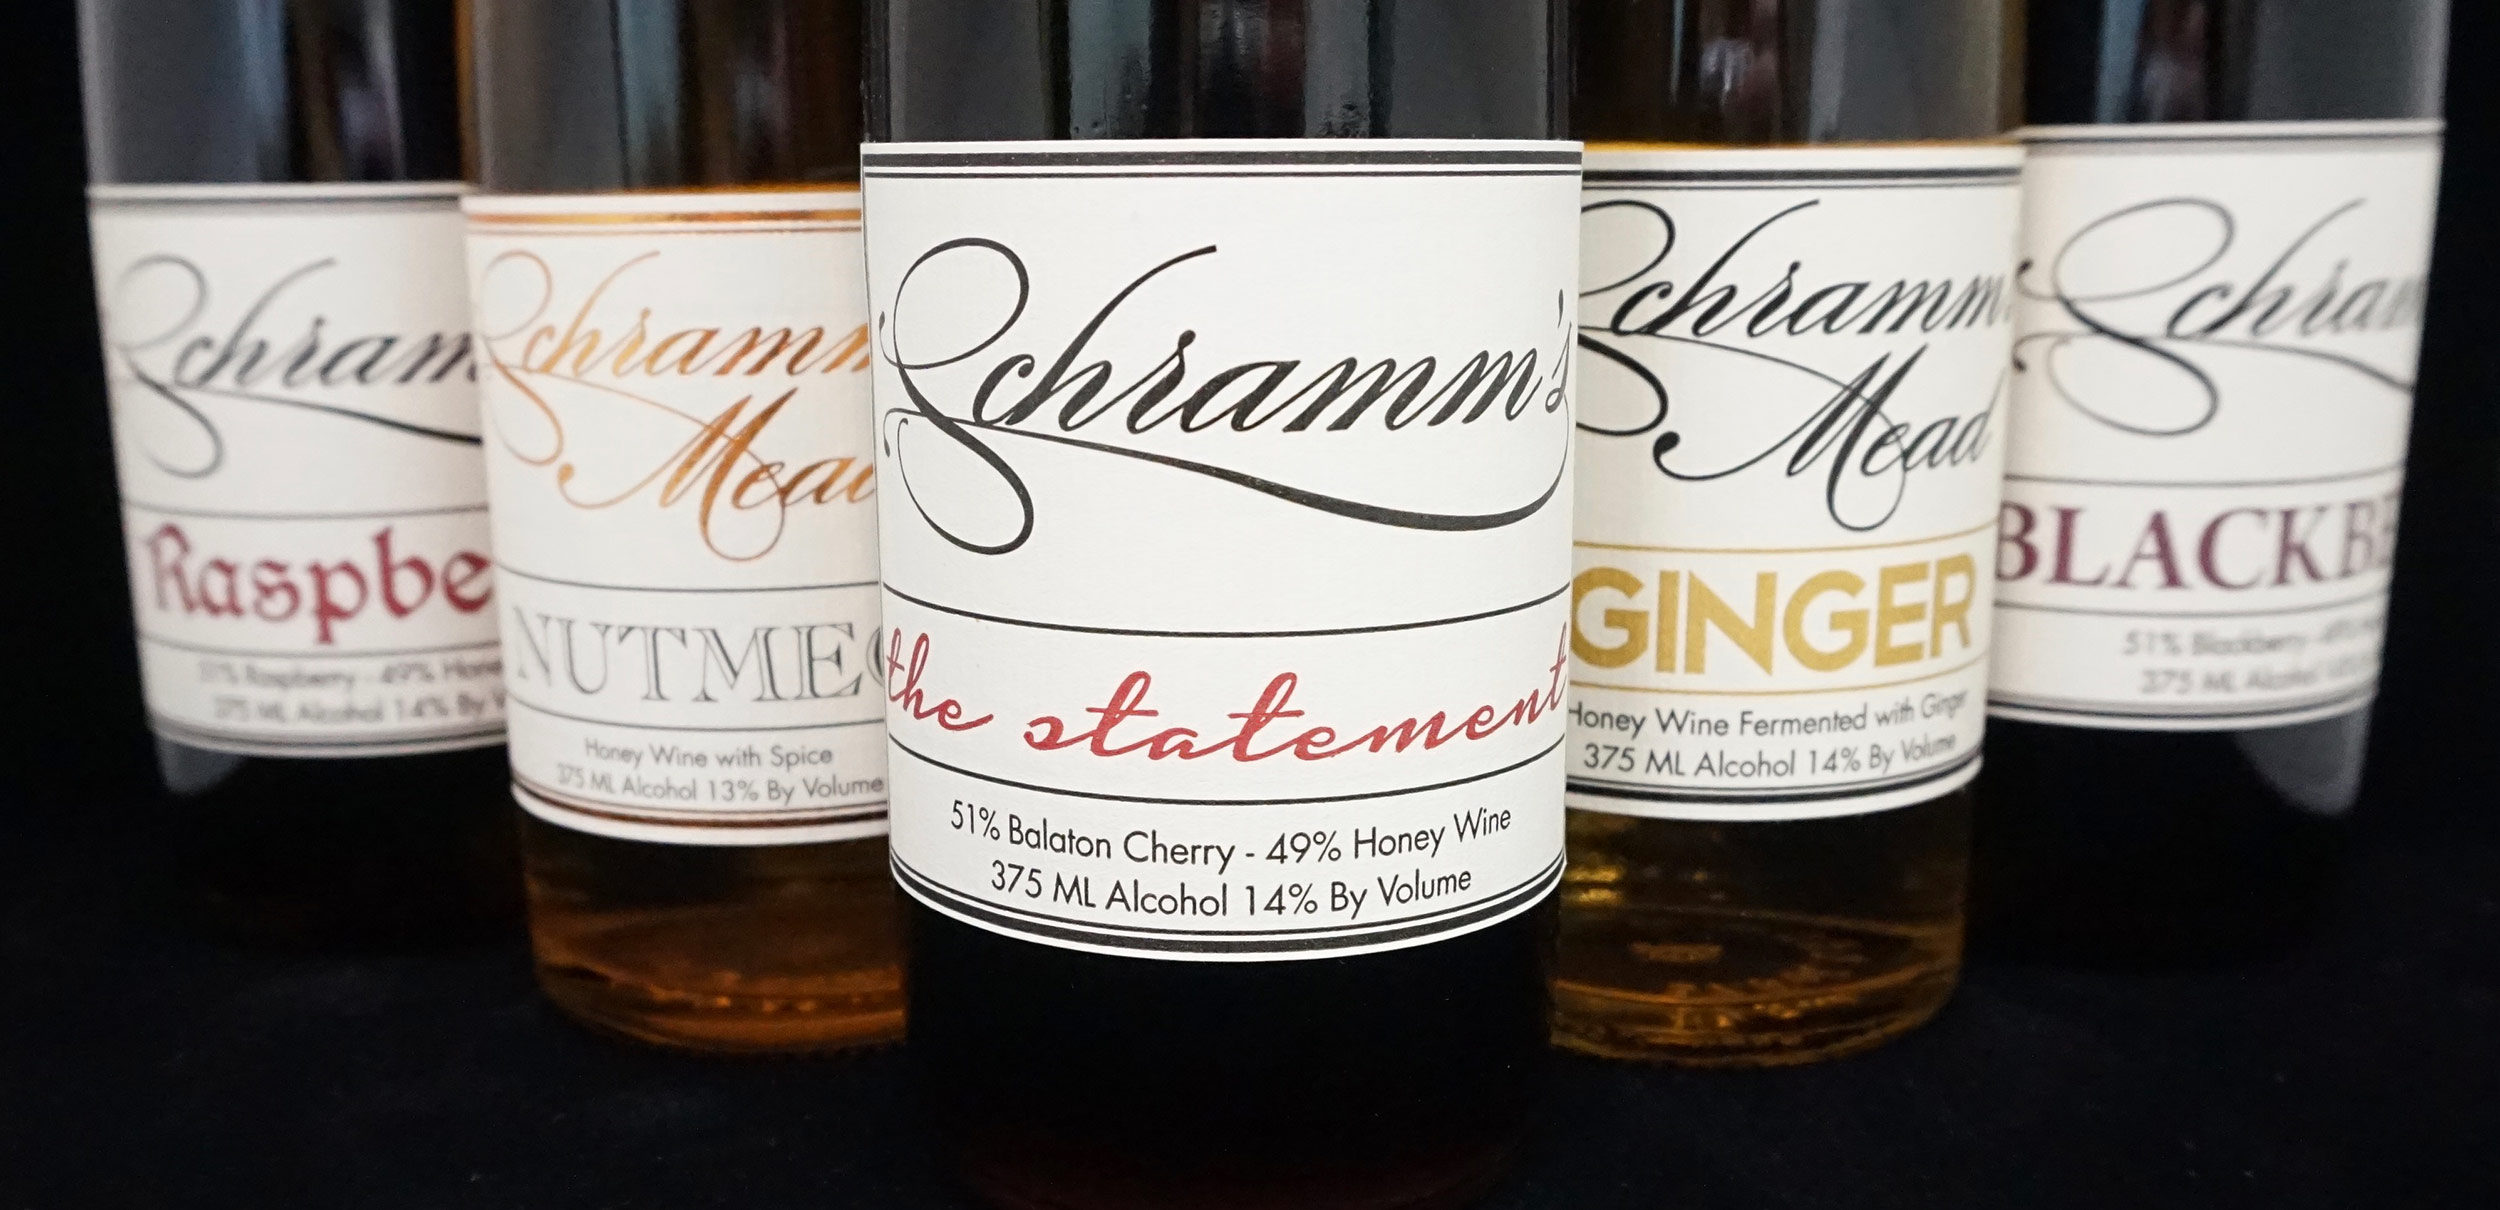 bottle selection from schramms mead